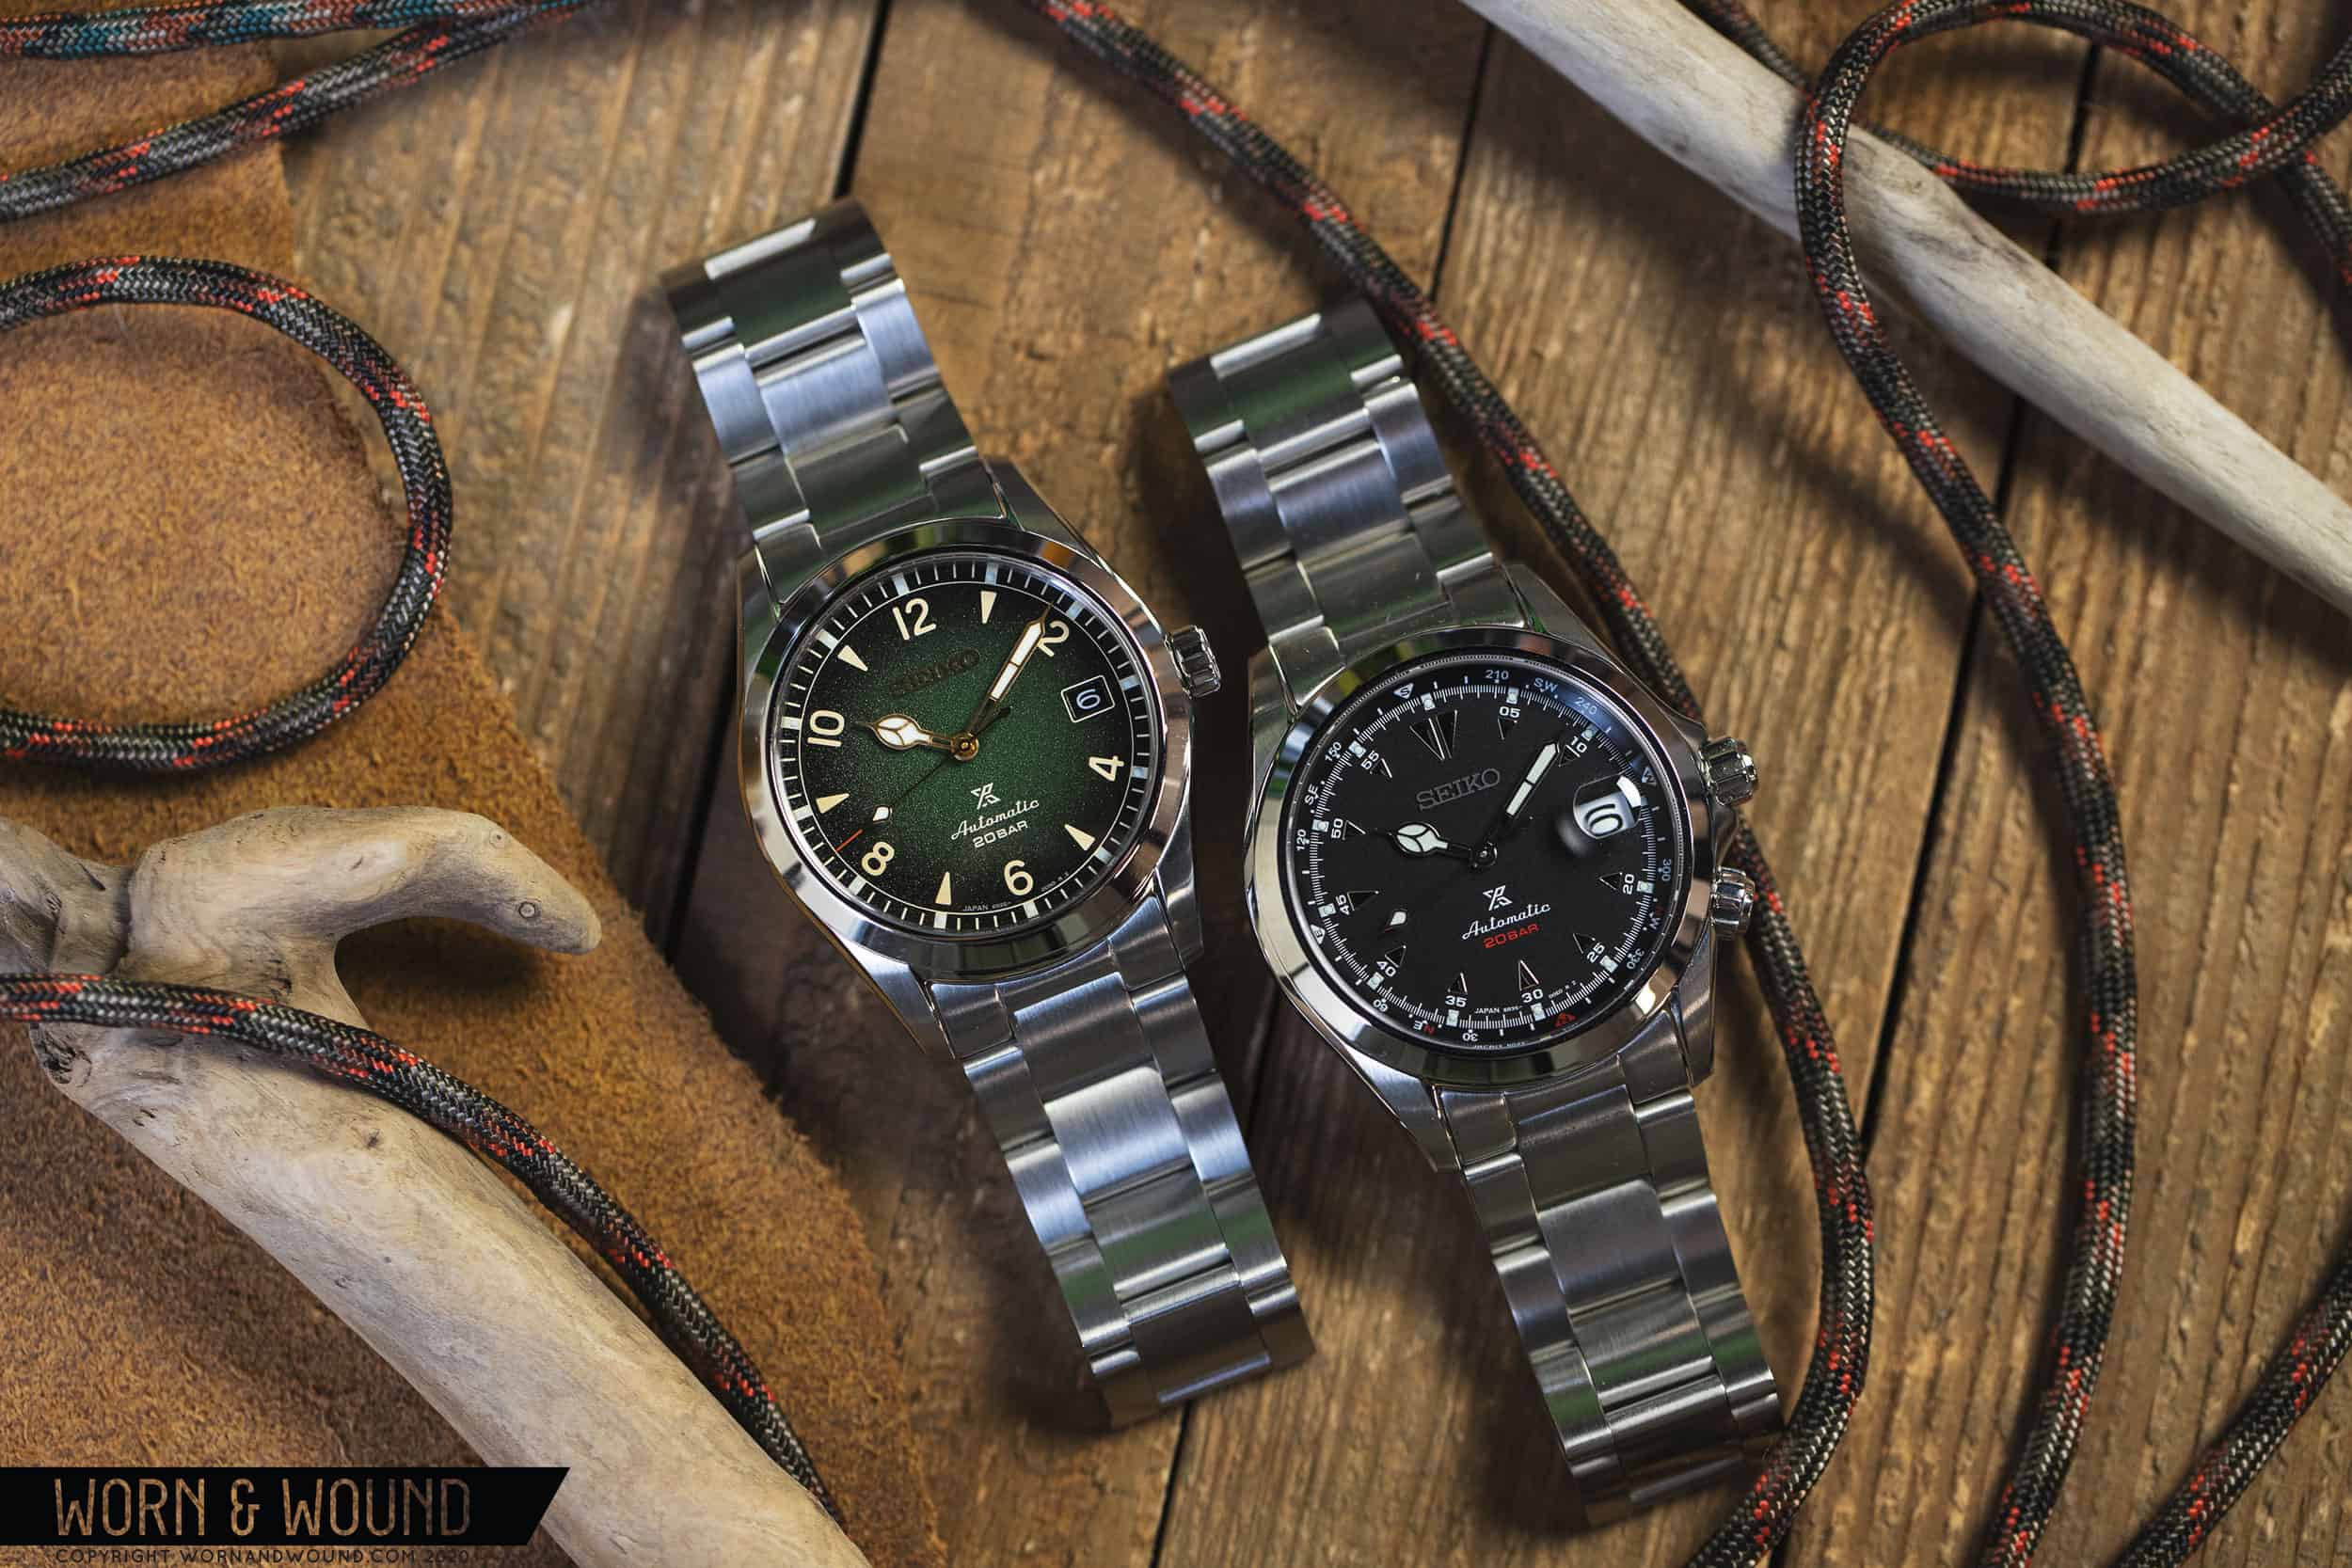 Uovertruffen Somatisk celle hyppigt First Look: Seiko Expands their Alpinist Line with a New, Smaller Model -  Worn & Wound